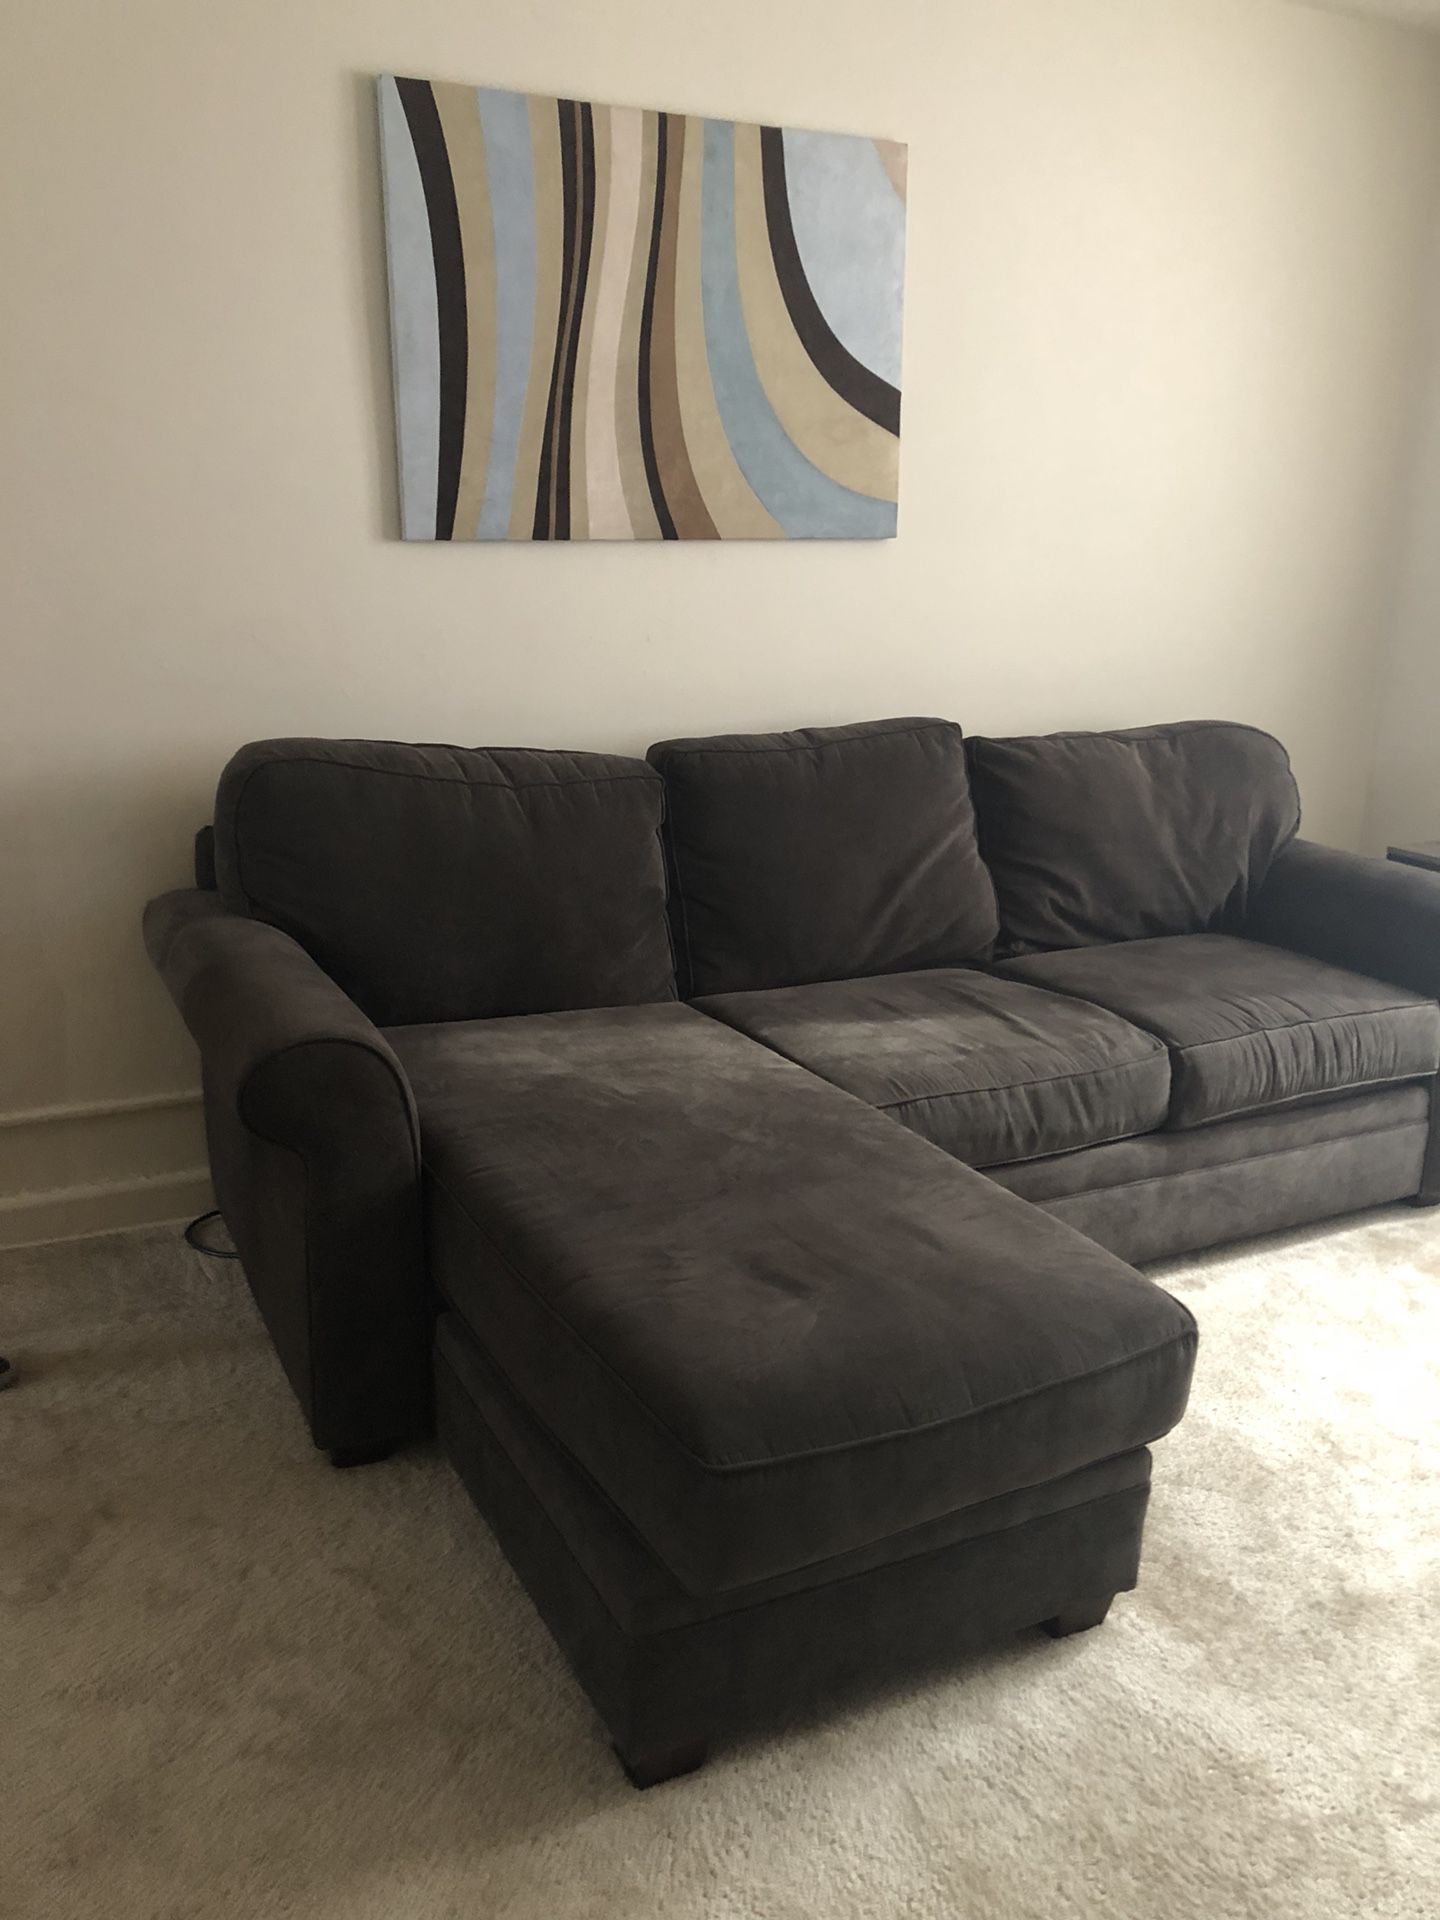 Sectional Couch + Wall Art